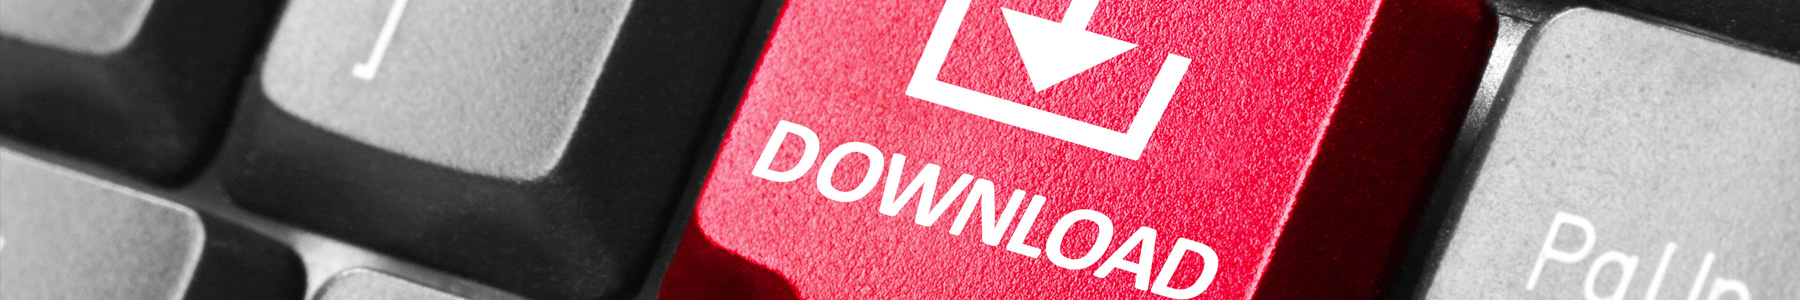 Downloads Library banner graphic